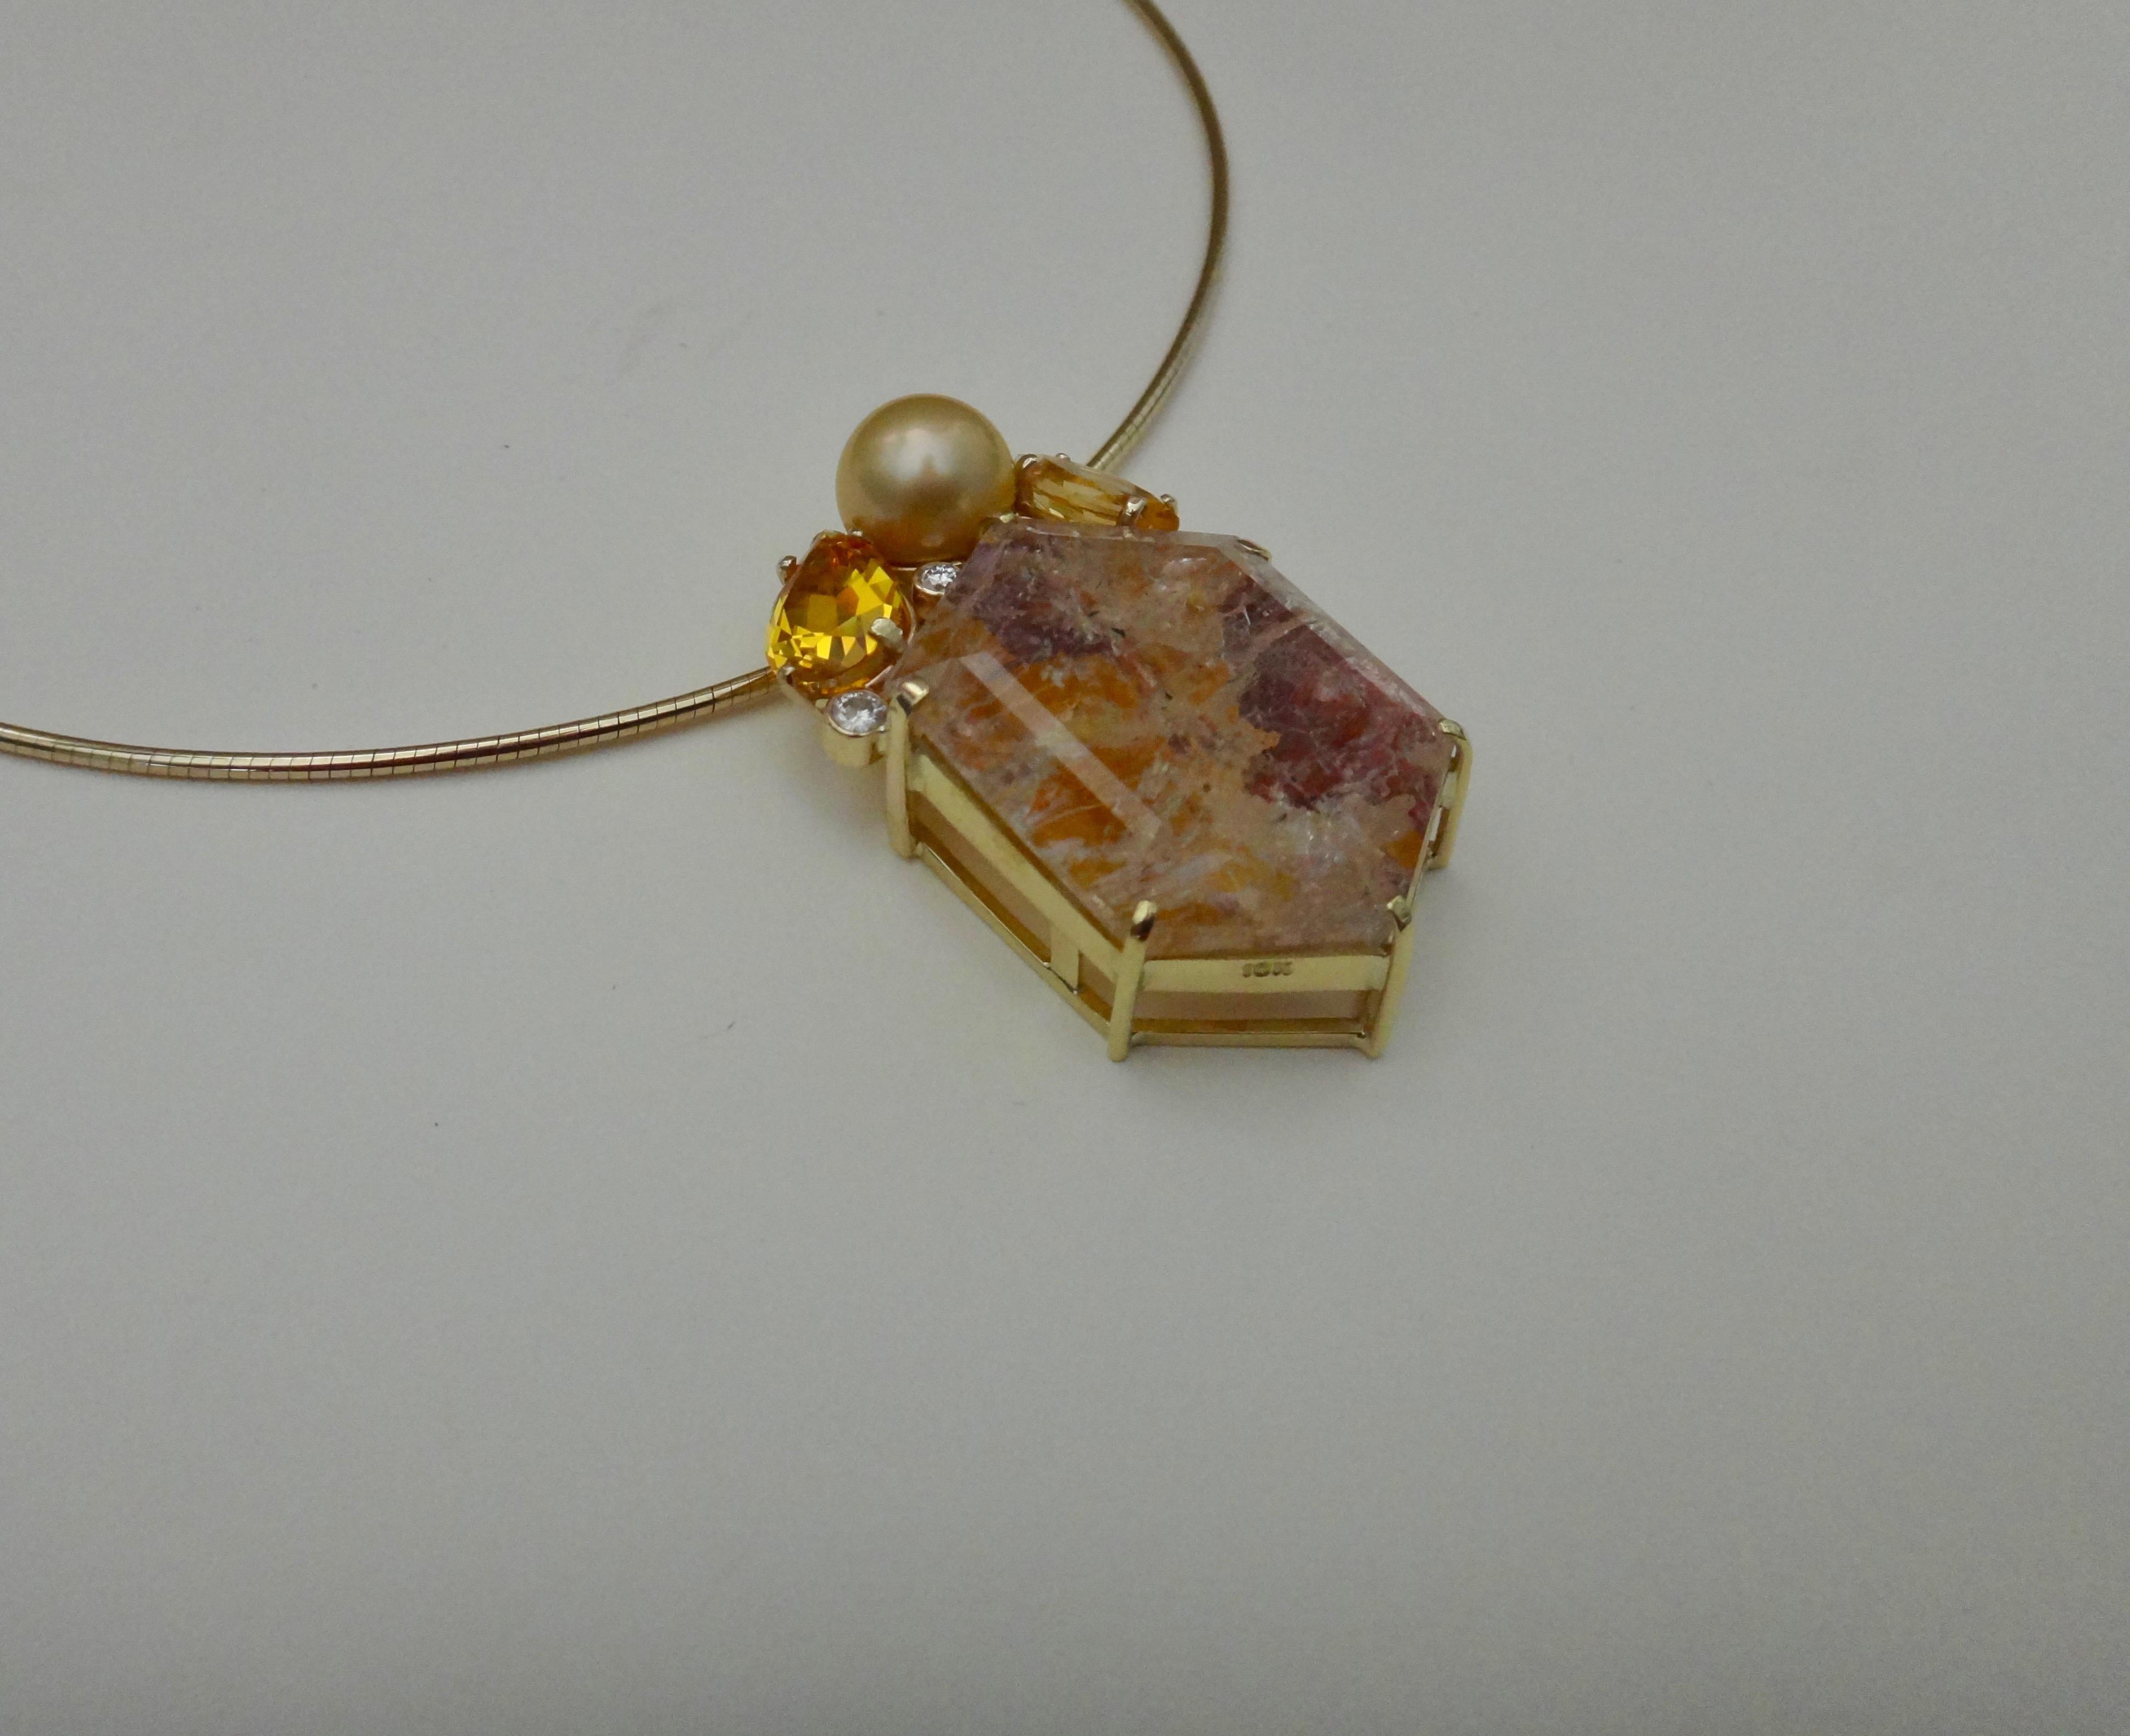 A boldly configured hexagon shaped phantom quartz is the centerpiece of this confetti pendant.  Pale shades of rust and gold are due to iron oxide trapped within the clear quartz.  Those colors are complimented by pear shaped and marquise shaped